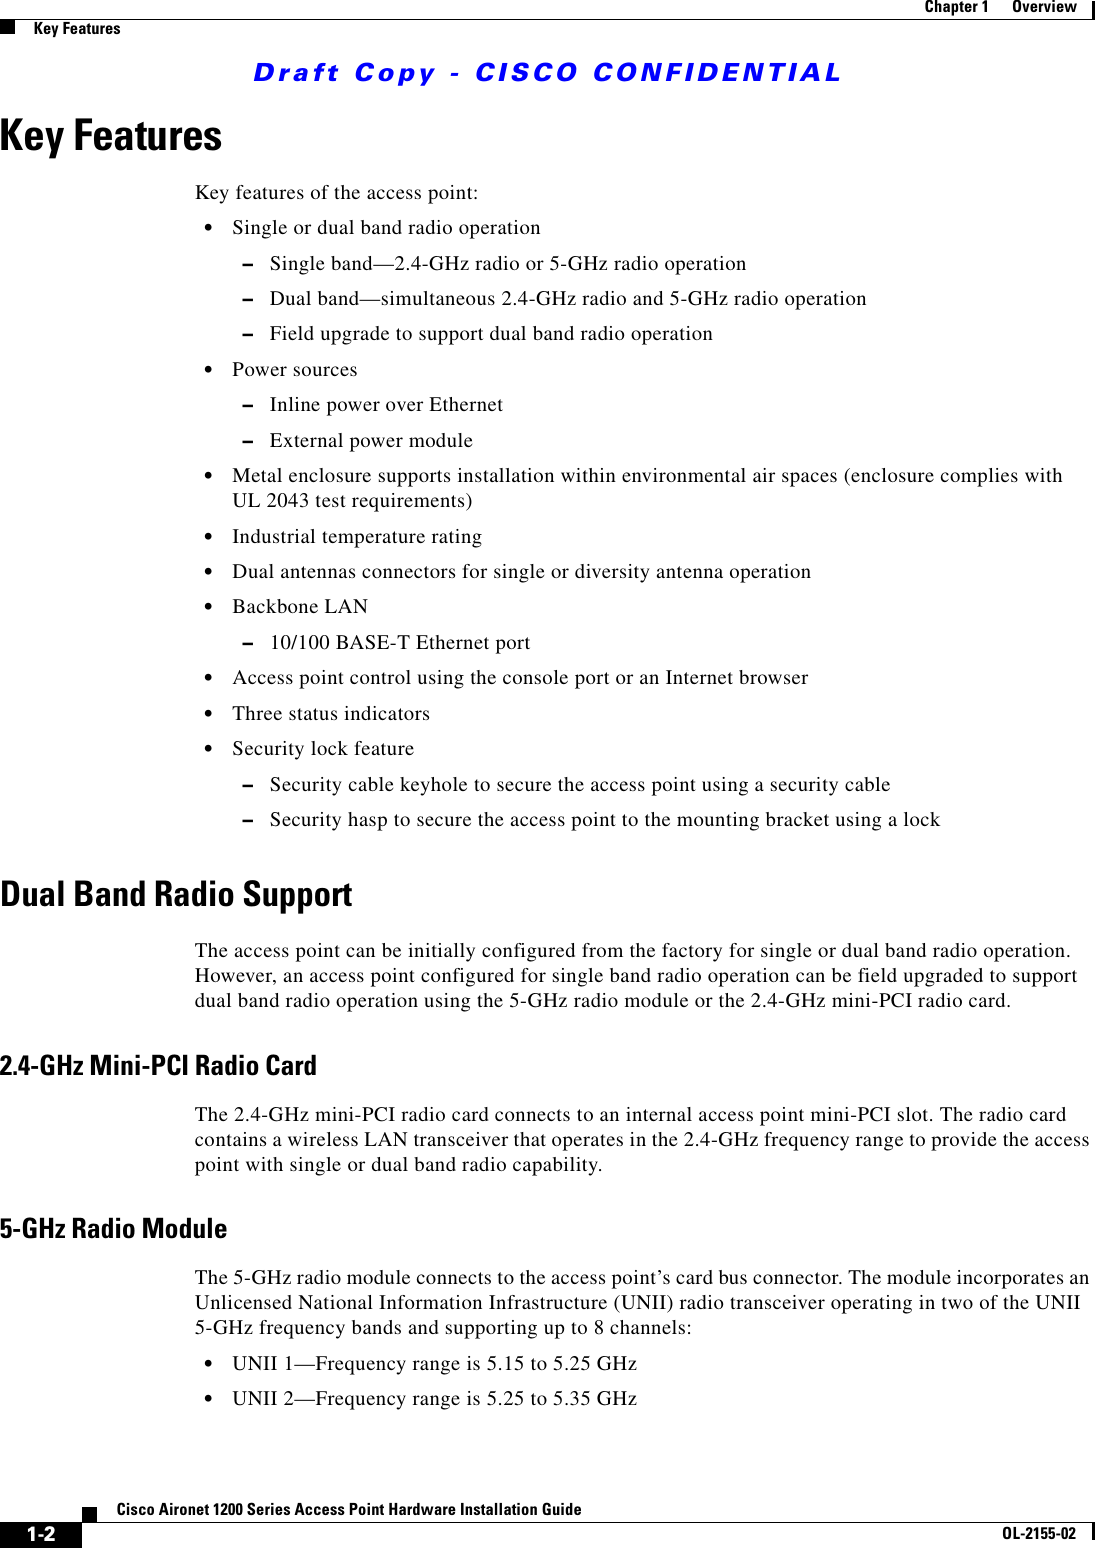 Draft Copy - CISCO CONFIDENTIAL 1-2Cisco Aironet 1200 Series Access Point Hardware Installation GuideOL-2155-02Chapter 1      OverviewKey FeaturesKey FeaturesKey features of the access point:•Single or dual band radio operation–Single band—2.4-GHz radio or 5-GHz radio operation–Dual band—simultaneous 2.4-GHz radio and 5-GHz radio operation–Field upgrade to support dual band radio operation •Power sources–Inline power over Ethernet –External power module•Metal enclosure supports installation within environmental air spaces (enclosure complies with UL 2043 test requirements)•Industrial temperature rating•Dual antennas connectors for single or diversity antenna operation•Backbone LAN–10/100 BASE-T Ethernet port•Access point control using the console port or an Internet browser •Three status indicators•Security lock feature–Security cable keyhole to secure the access point using a security cable–Security hasp to secure the access point to the mounting bracket using a lockDual Band Radio SupportThe access point can be initially configured from the factory for single or dual band radio operation. However, an access point configured for single band radio operation can be field upgraded to support dual band radio operation using the 5-GHz radio module or the 2.4-GHz mini-PCI radio card. 2.4-GHz Mini-PCI Radio CardThe 2.4-GHz mini-PCI radio card connects to an internal access point mini-PCI slot. The radio card contains a wireless LAN transceiver that operates in the 2.4-GHz frequency range to provide the access point with single or dual band radio capability. 5-GHz Radio ModuleThe 5-GHz radio module connects to the access point’s card bus connector. The module incorporates an Unlicensed National Information Infrastructure (UNII) radio transceiver operating in two of the UNII 5-GHz frequency bands and supporting up to 8 channels:•UNII 1—Frequency range is 5.15 to 5.25 GHz •UNII 2—Frequency range is 5.25 to 5.35 GHz